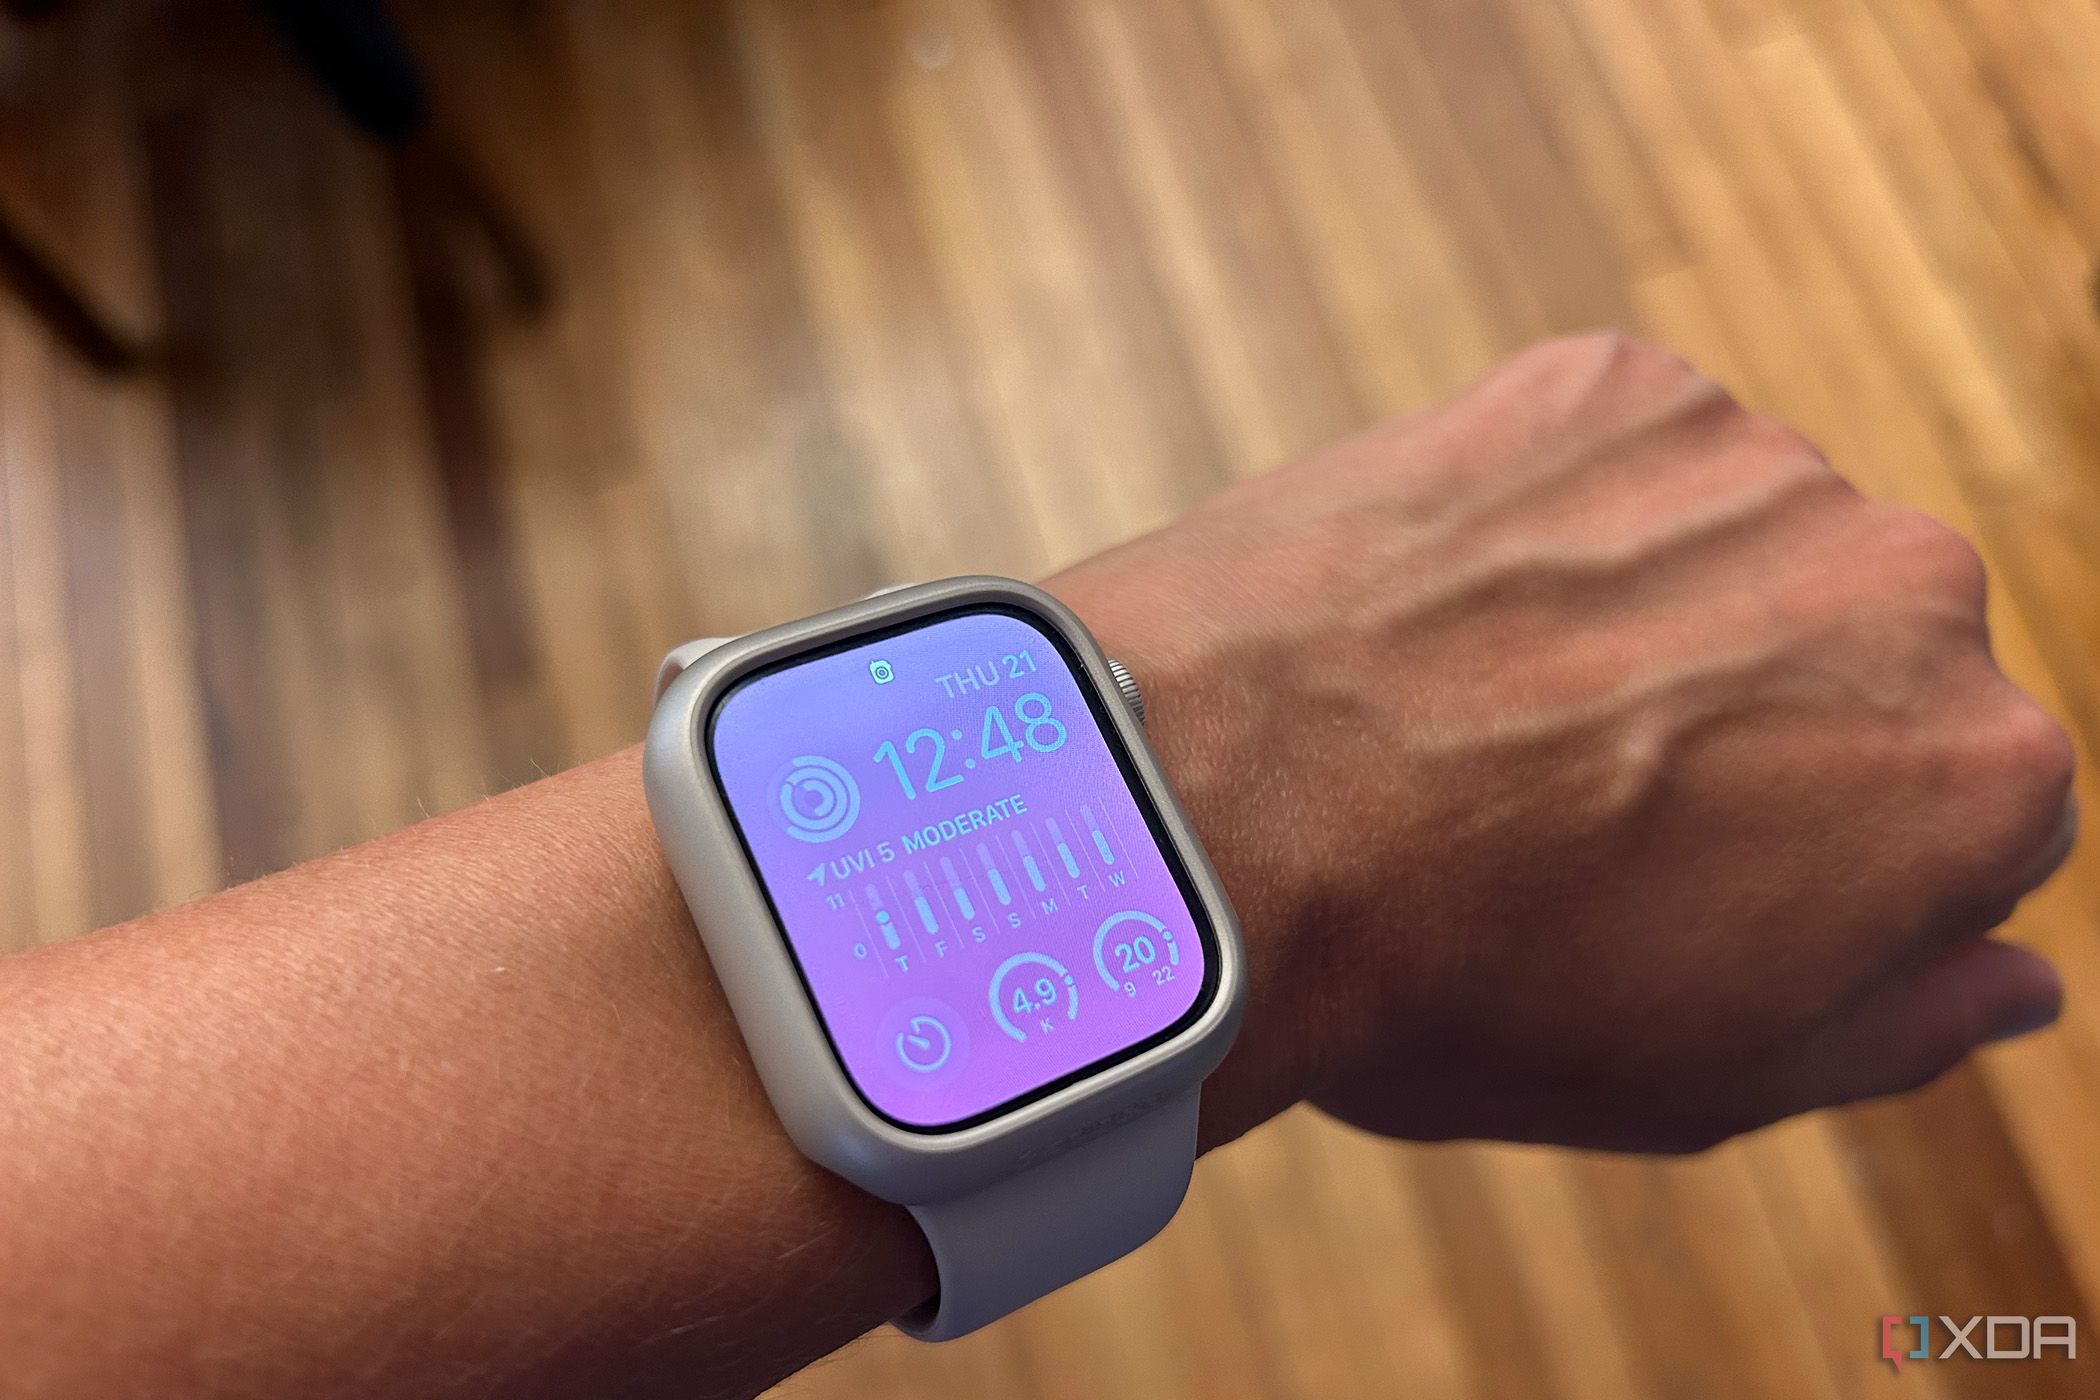 How to see your daily steps on your Apple Watch face